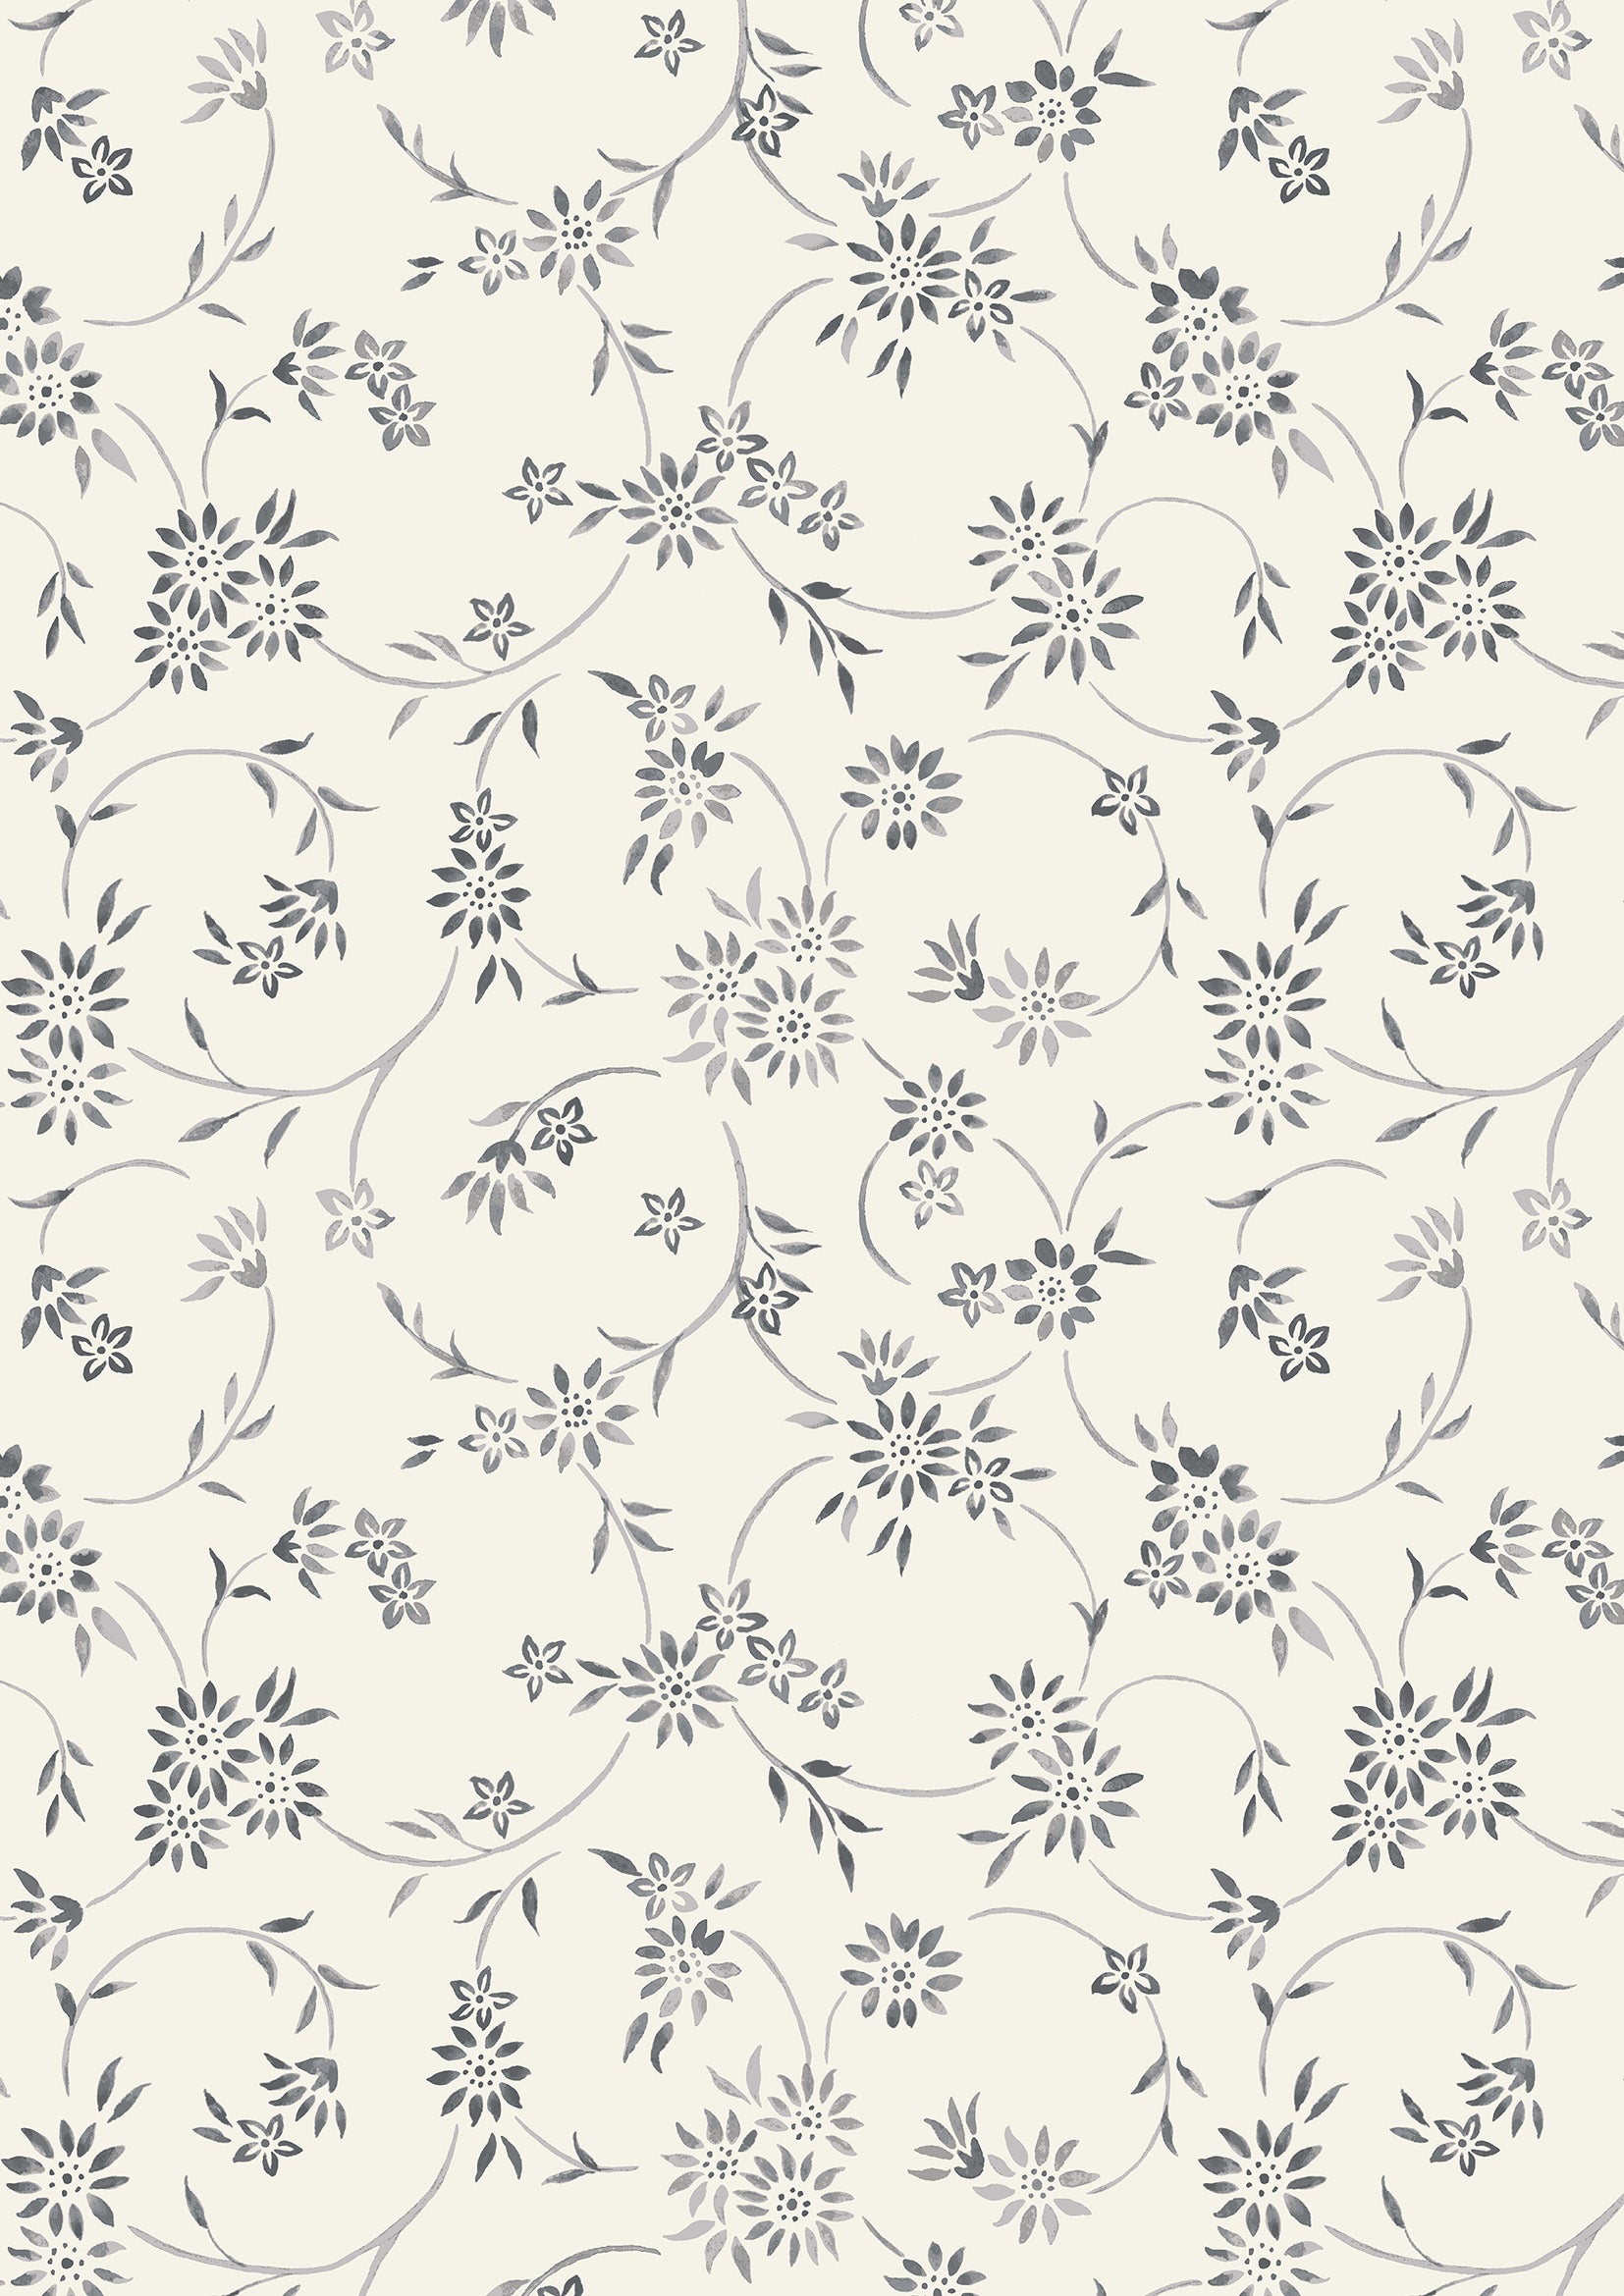 lois daisy from the winterbourne collection by Liberty of London fabrics